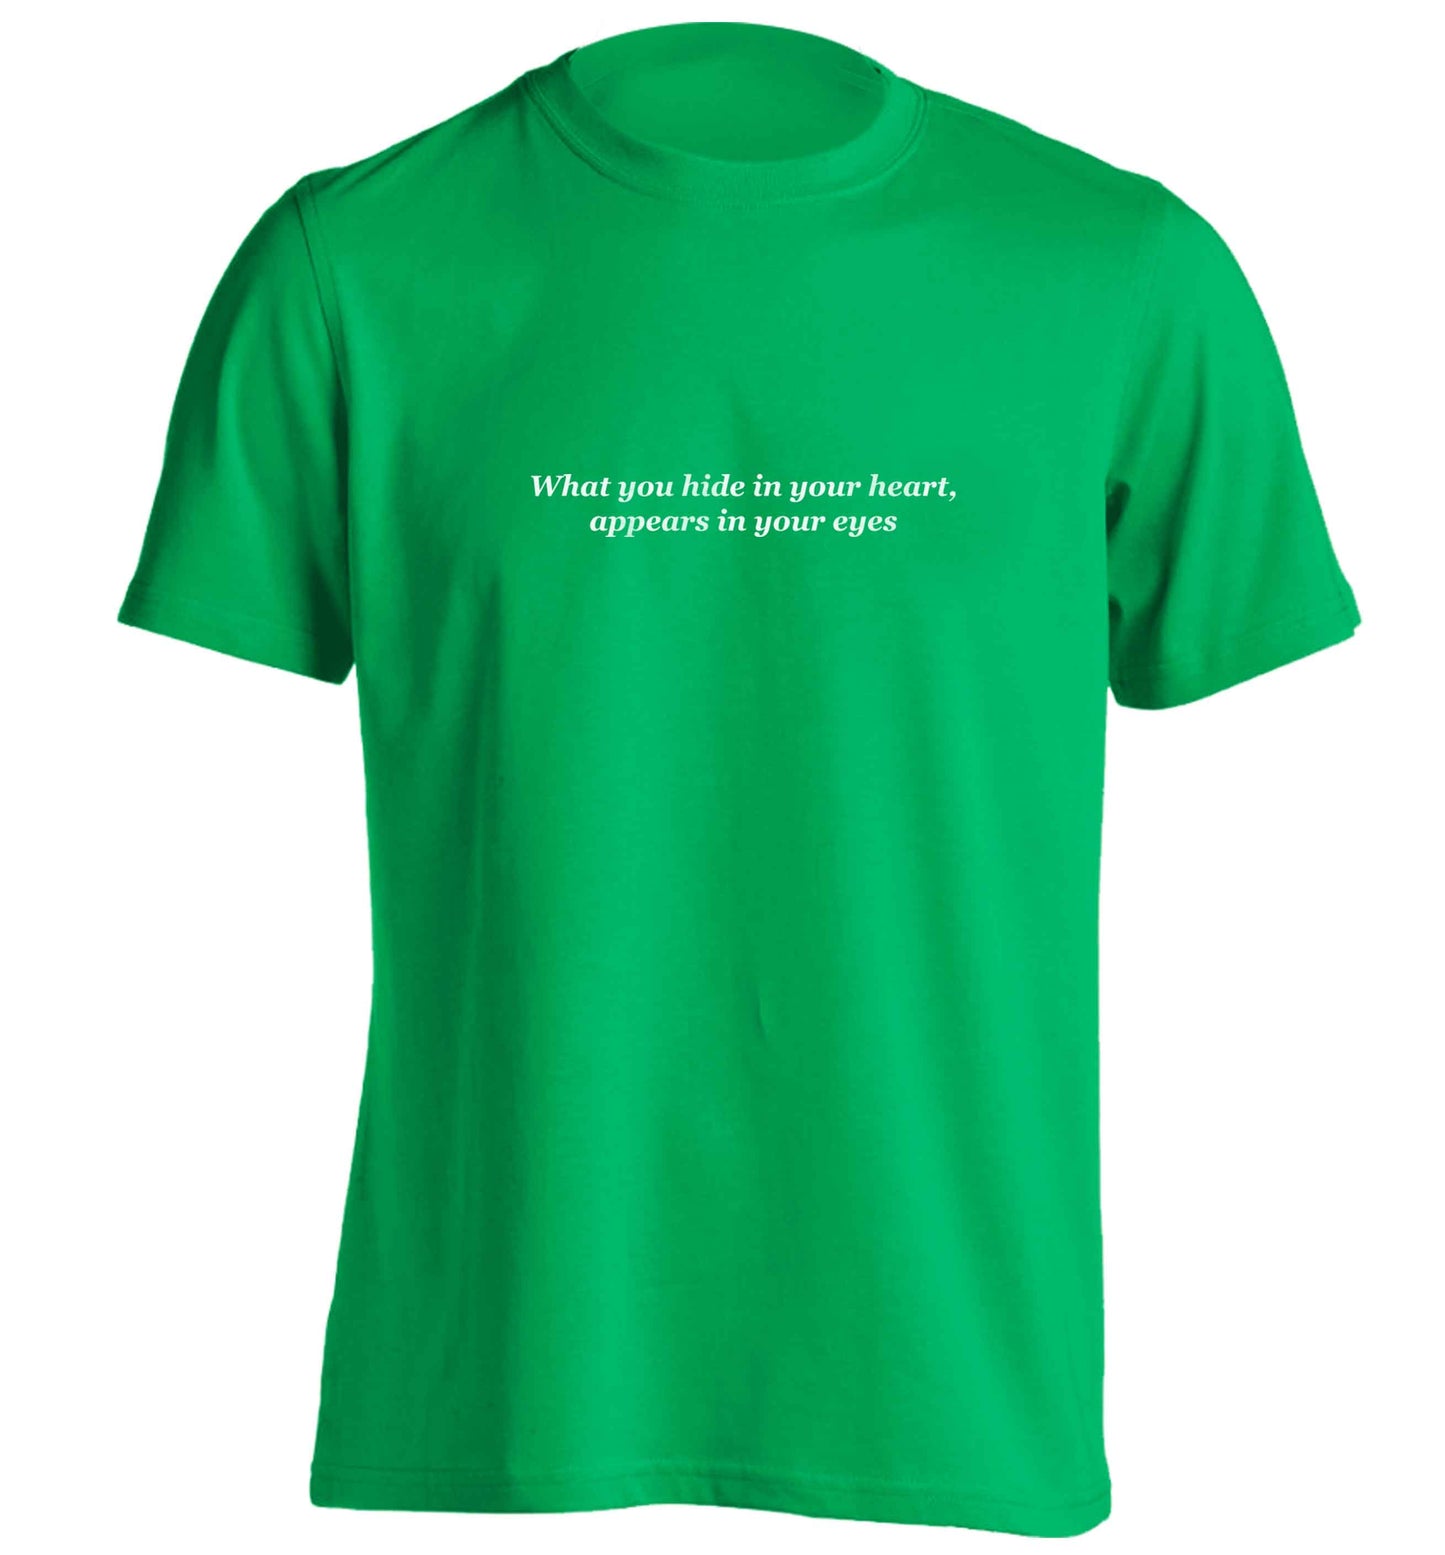 What you hide in your heart, appears in your eyes adults unisex green Tshirt 2XL